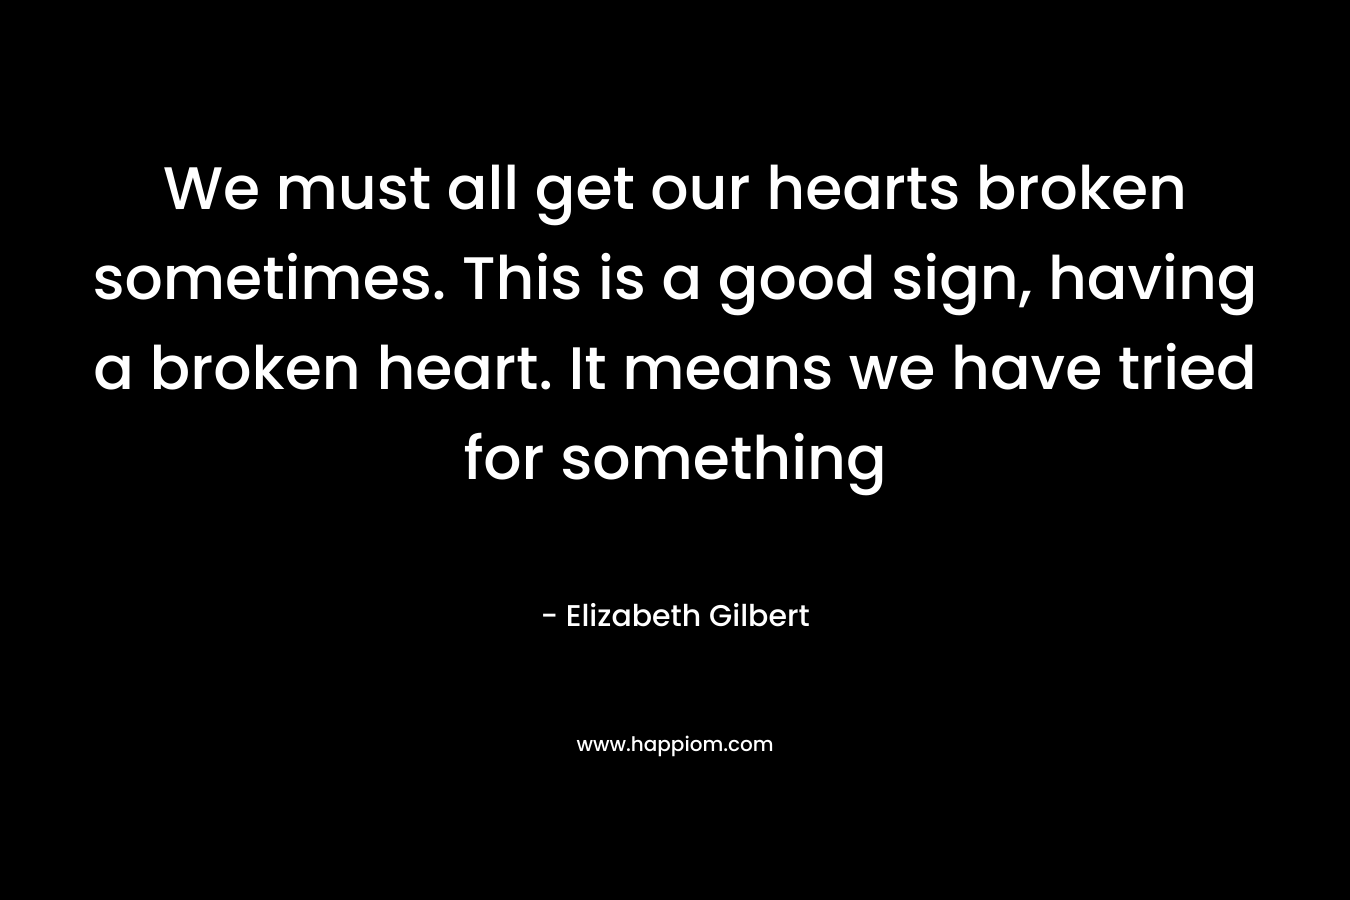 We must all get our hearts broken sometimes. This is a good sign, having a broken heart. It means we have tried for something – Elizabeth Gilbert